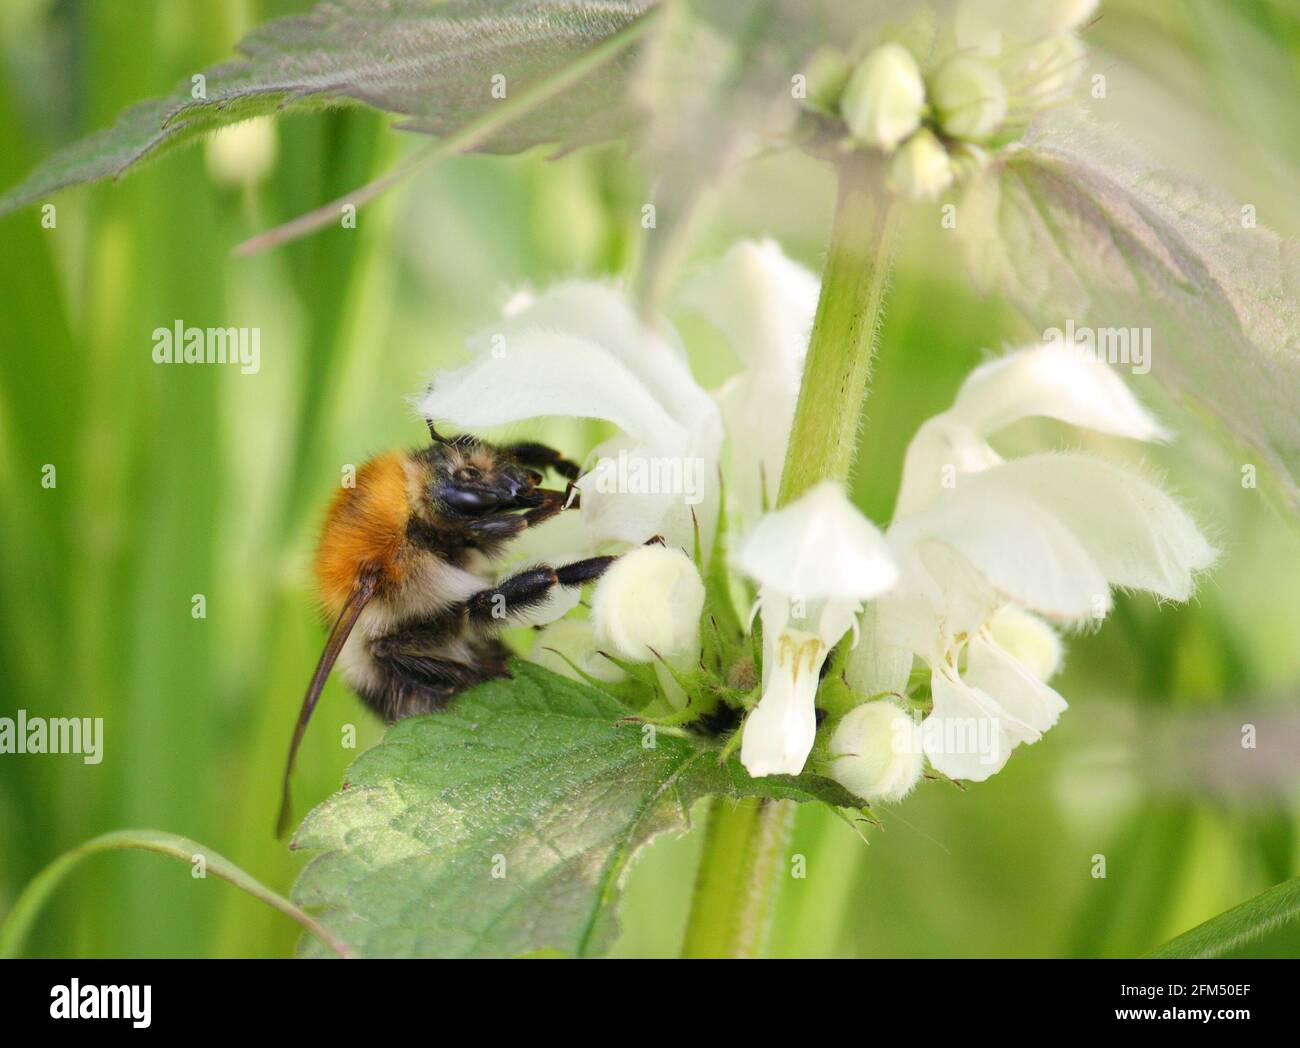 A Common Carder Bee (a type of Bumblebee, Bombus pascuorum) gathering nectar and pollen from the white flowers of a nettle plant in spring. Stock Photo